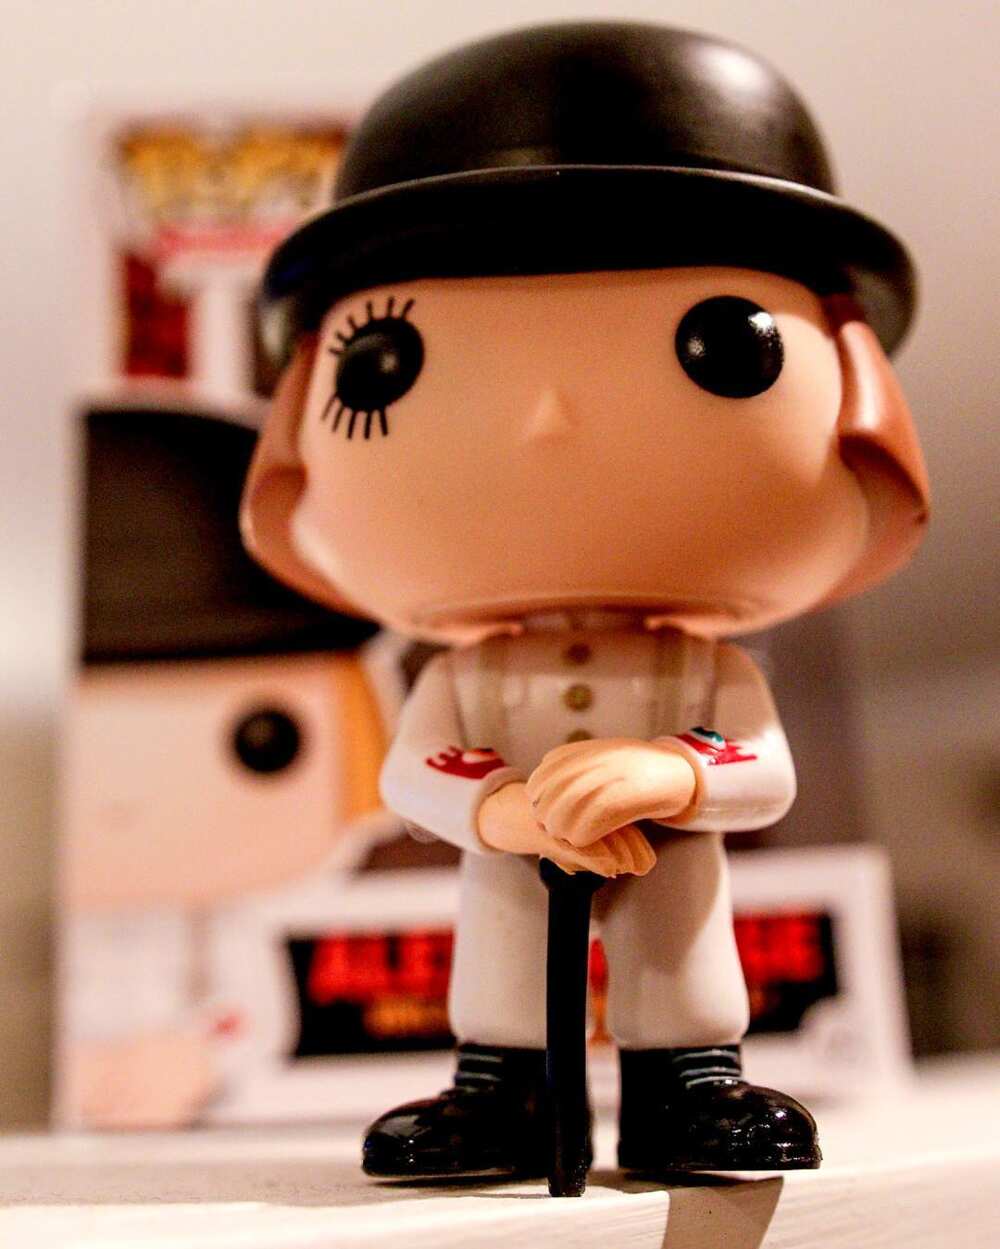 Most expensive Funko Pop